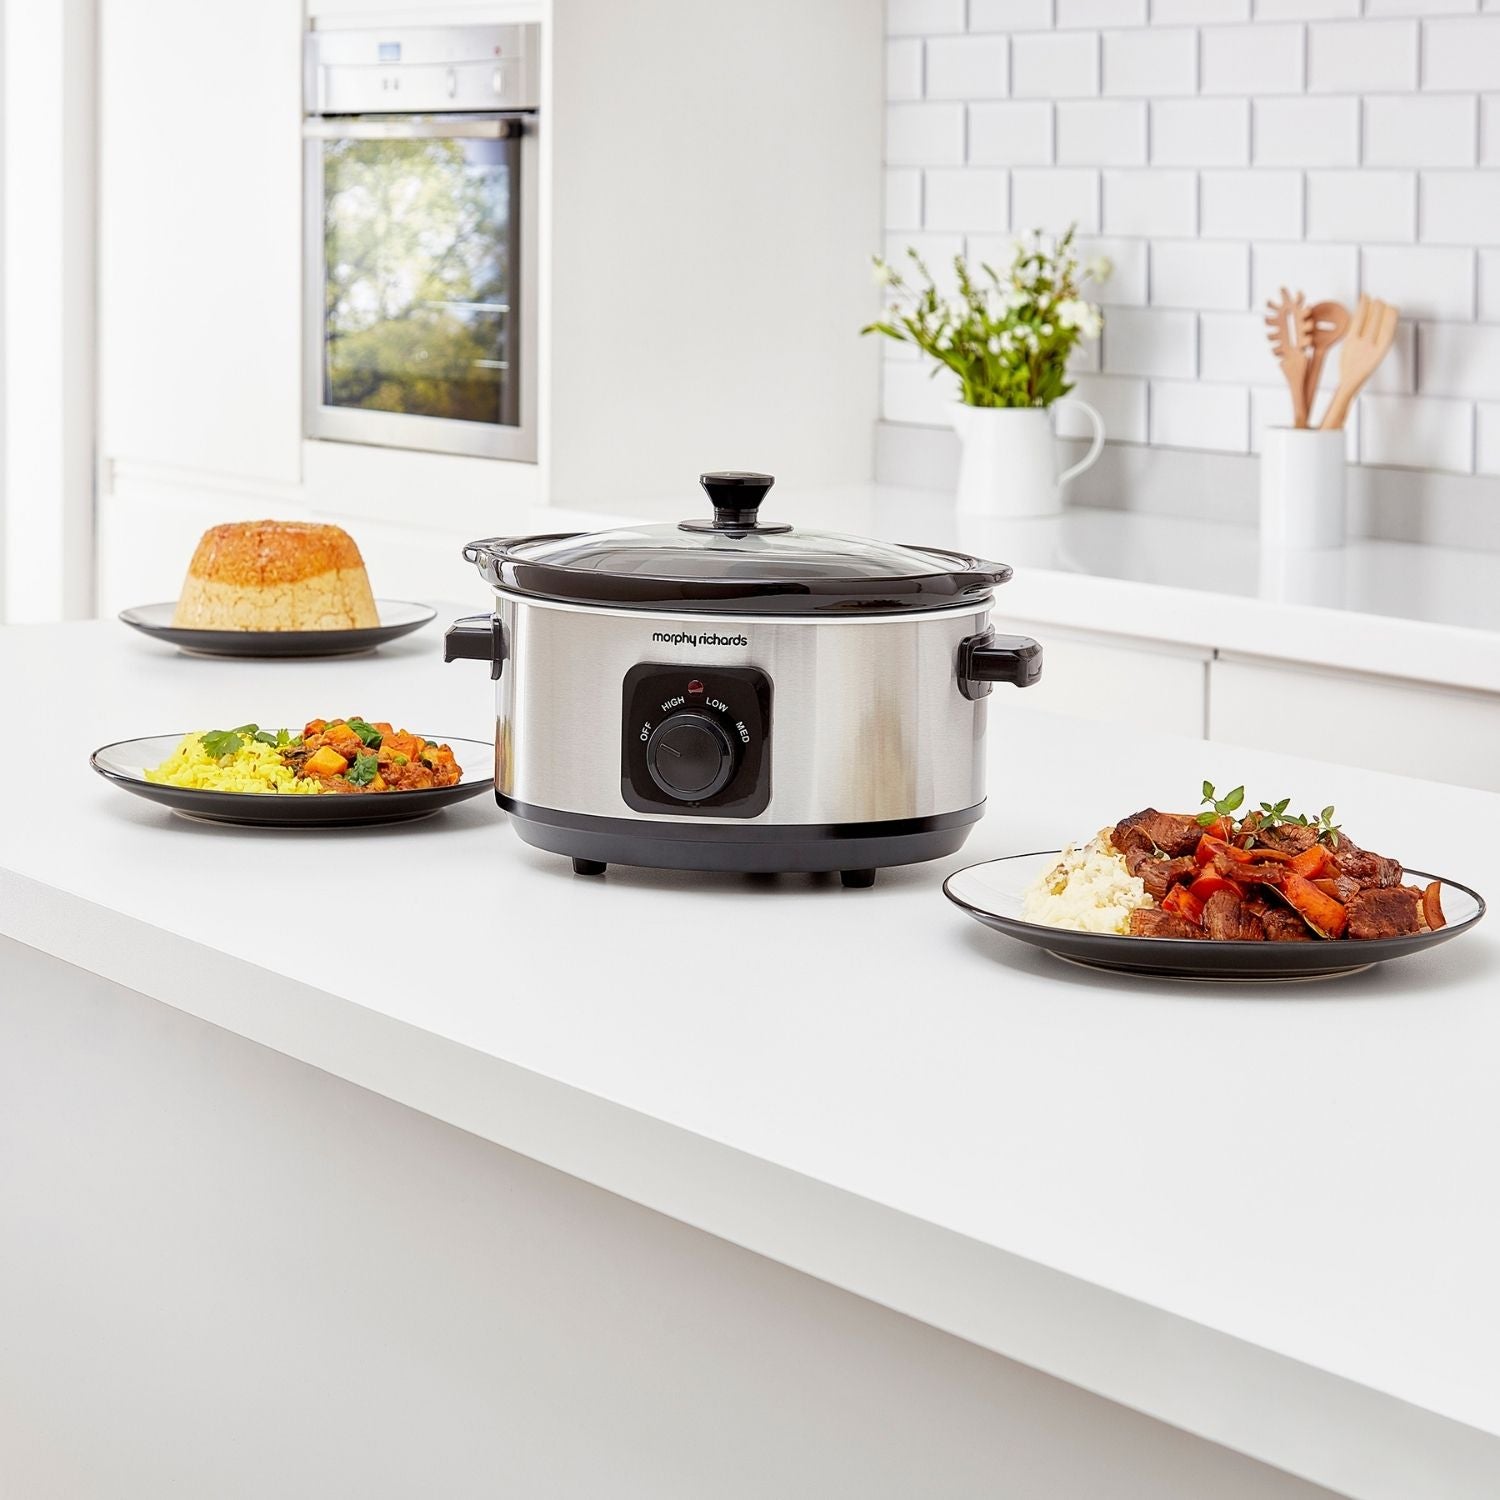 Morphy Richards Slow Cooker - 3.5L 2 Shaws Department Stores